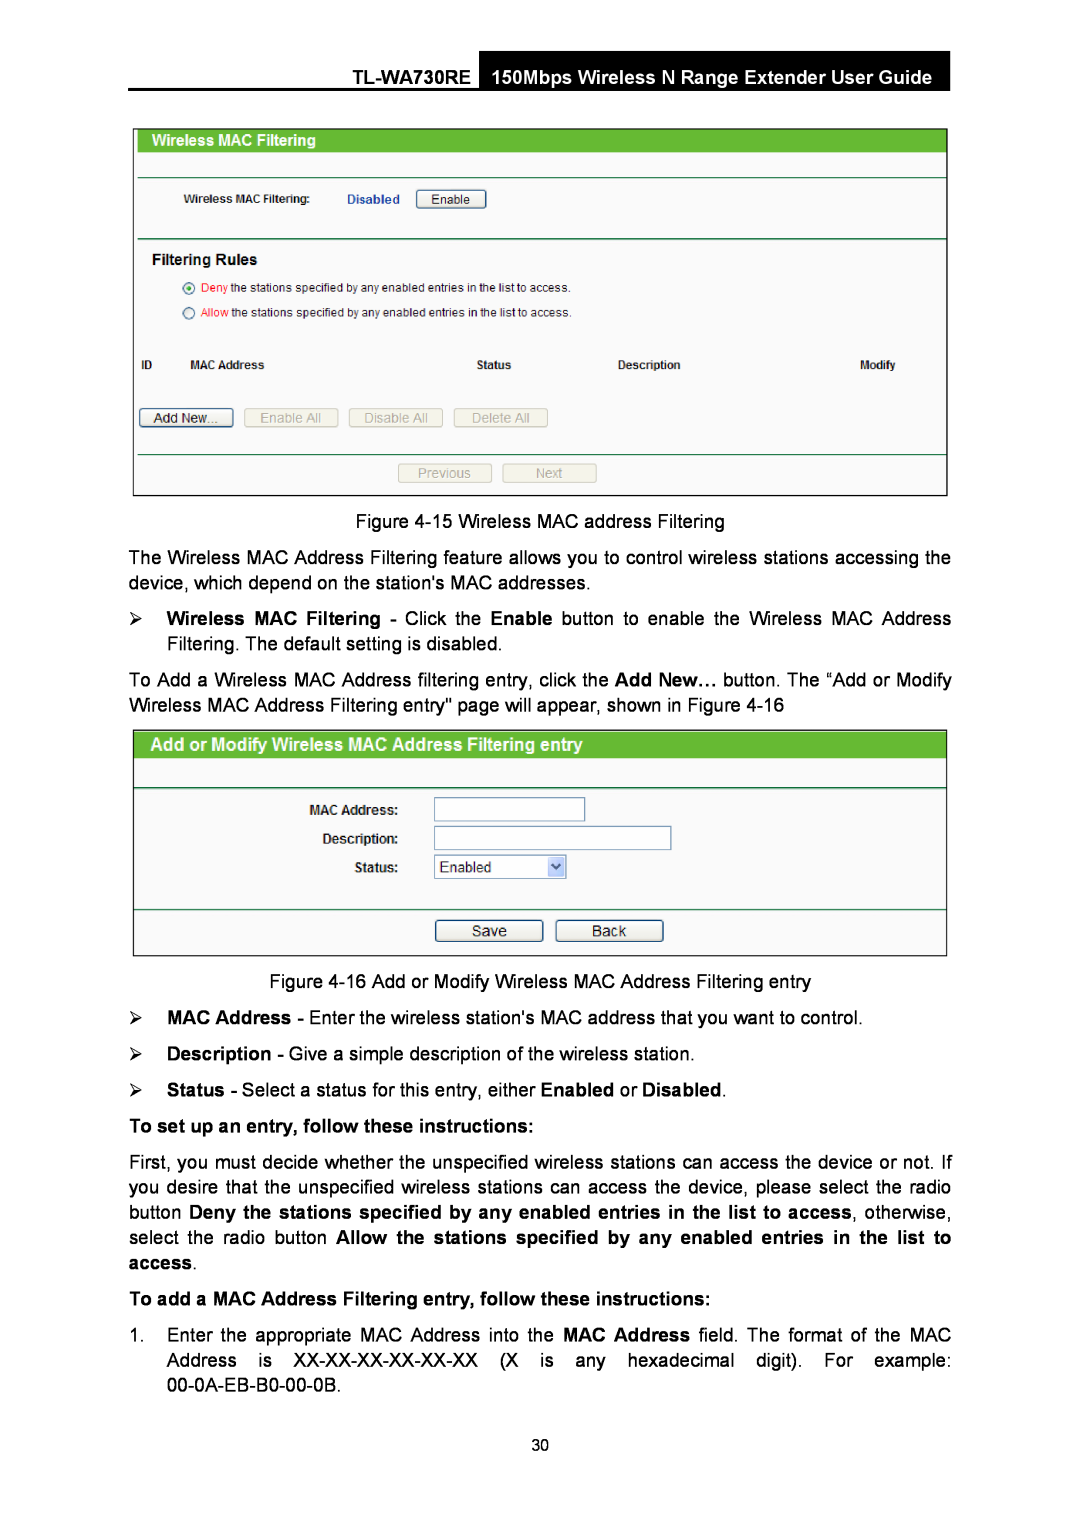 TP-Link manual TL-WA730RE 150Mbps Wireless N Range Extender User Guide, To set up an entry, follow these instructions 